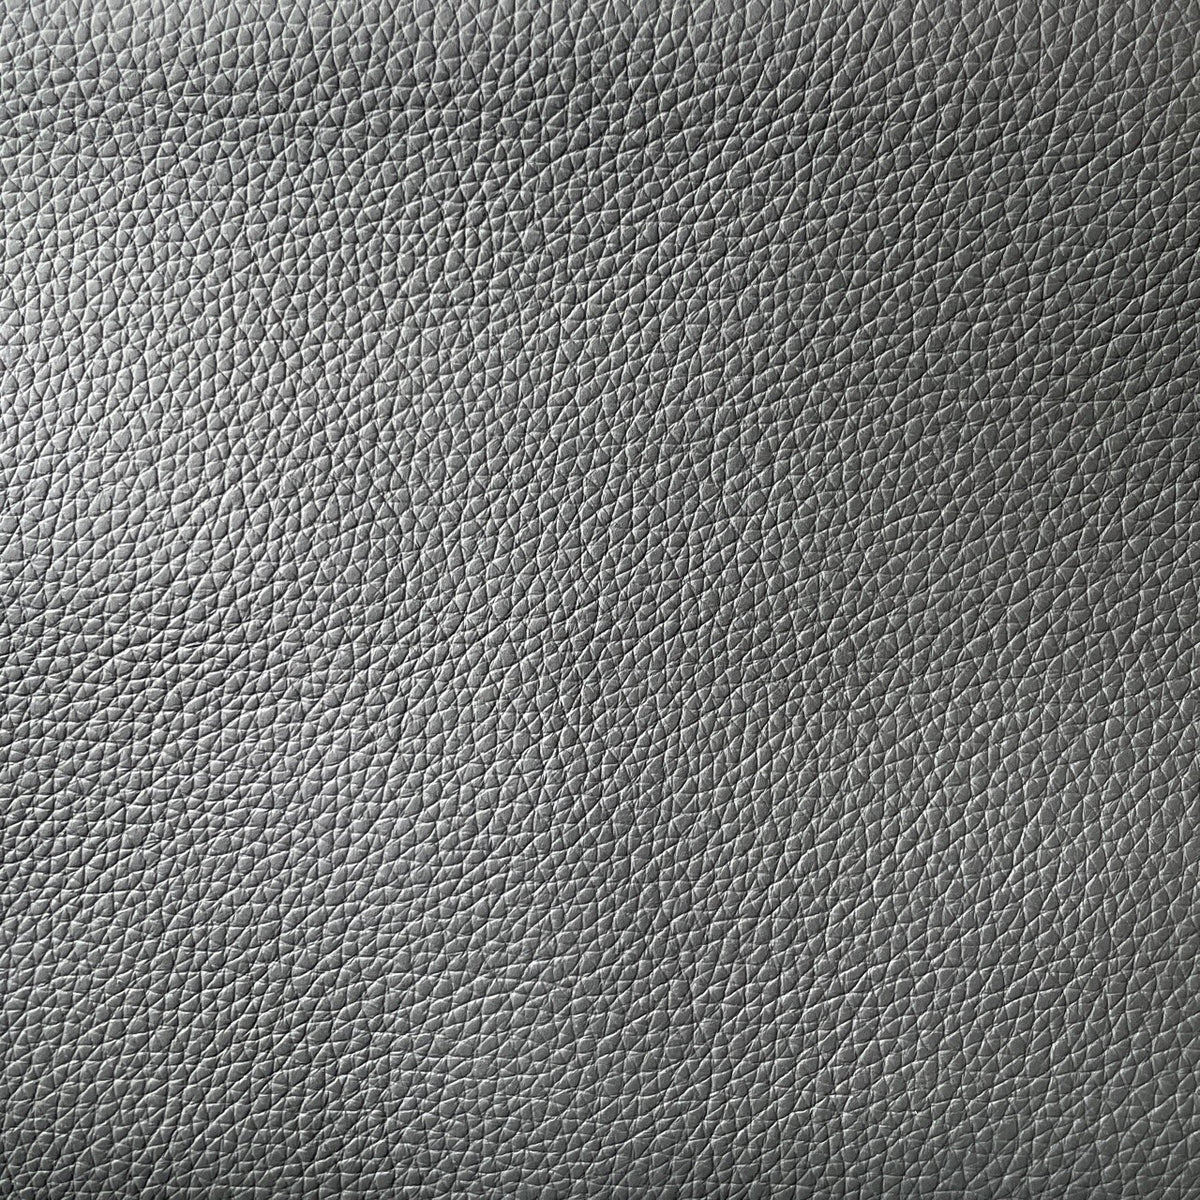 Upholstery Cow Hide #1 | Grey | 1.0/1.2mm | 50 sq.ft | $345 ea.